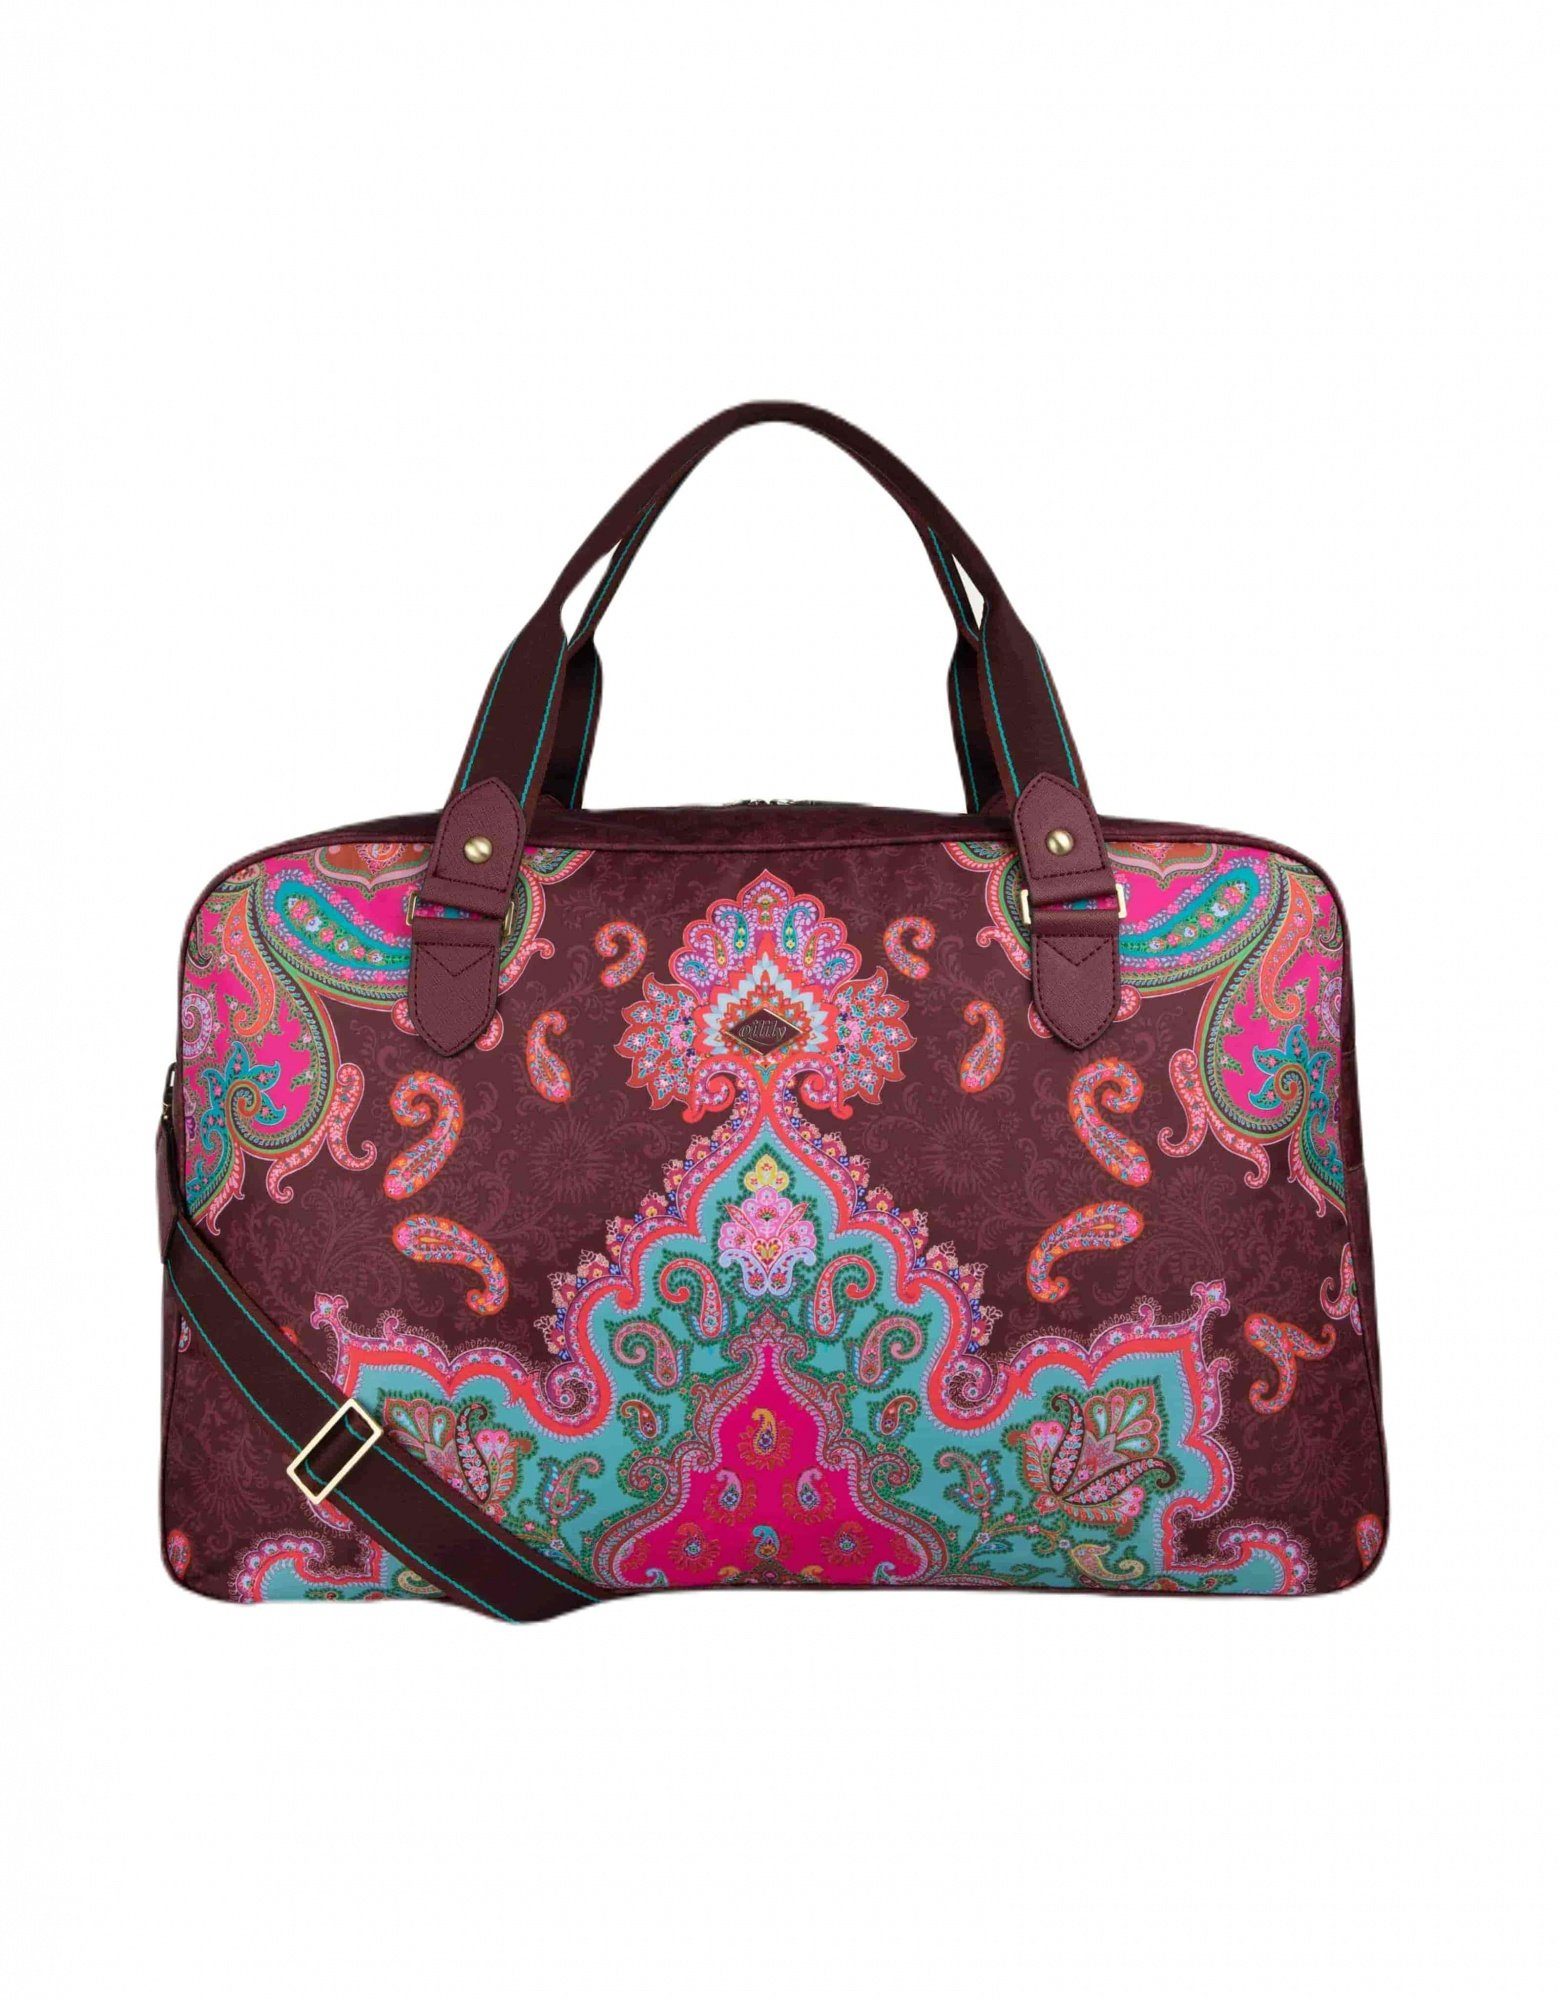 Weekender Mr Schultertasche Truffle Chocolate Oilily Paisley